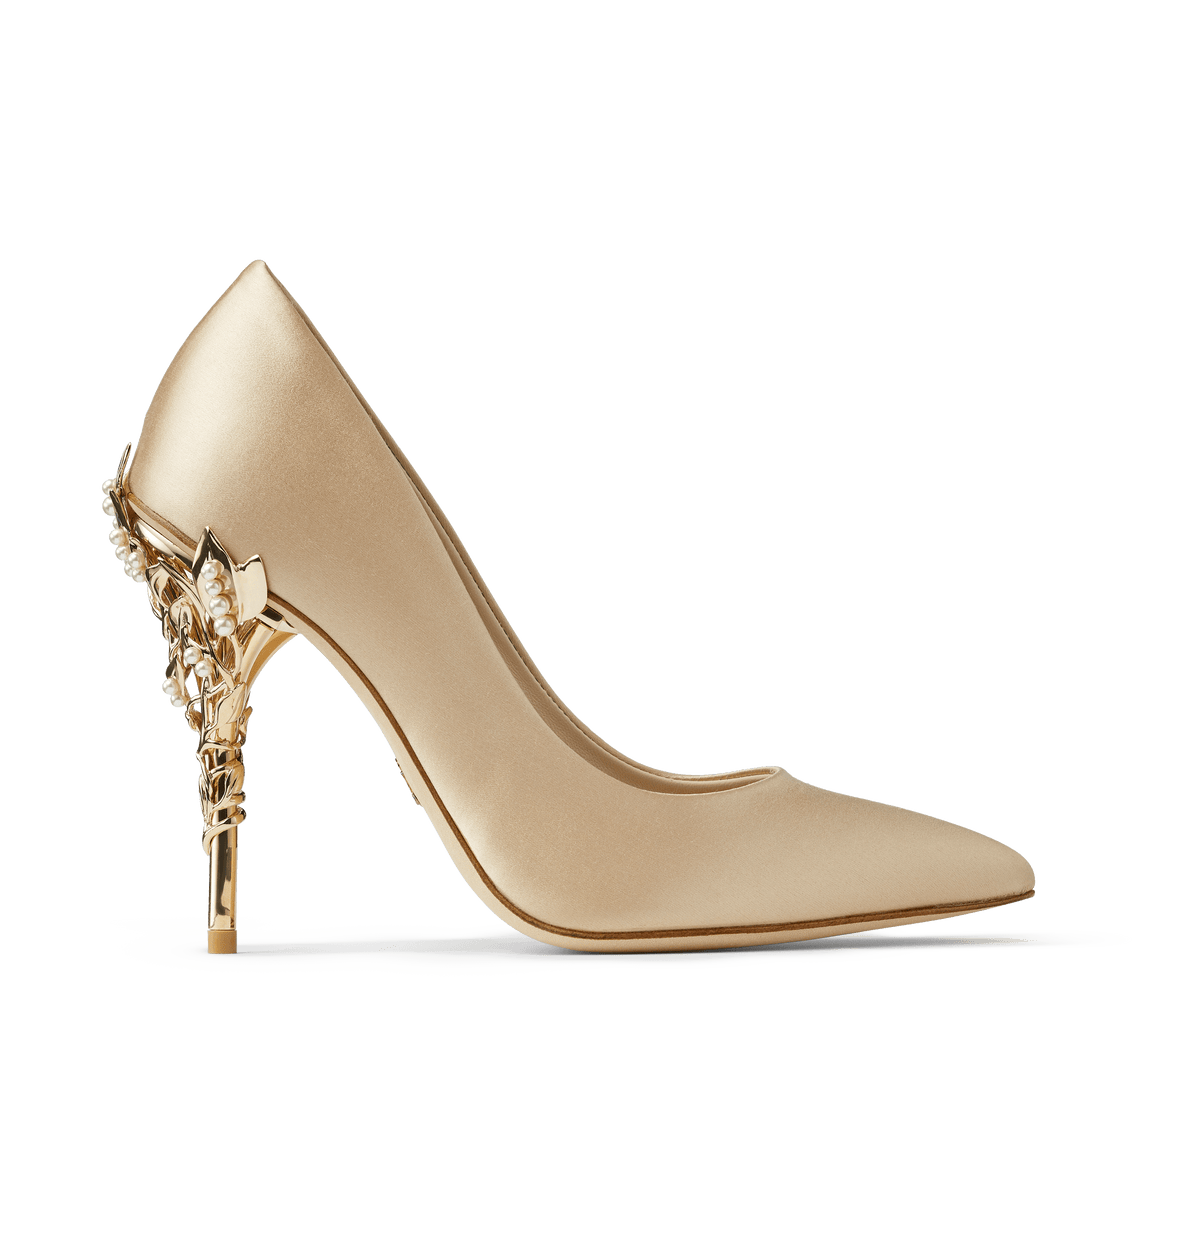 Gold Satin Eden Heels with Pearl and Gold Leaves